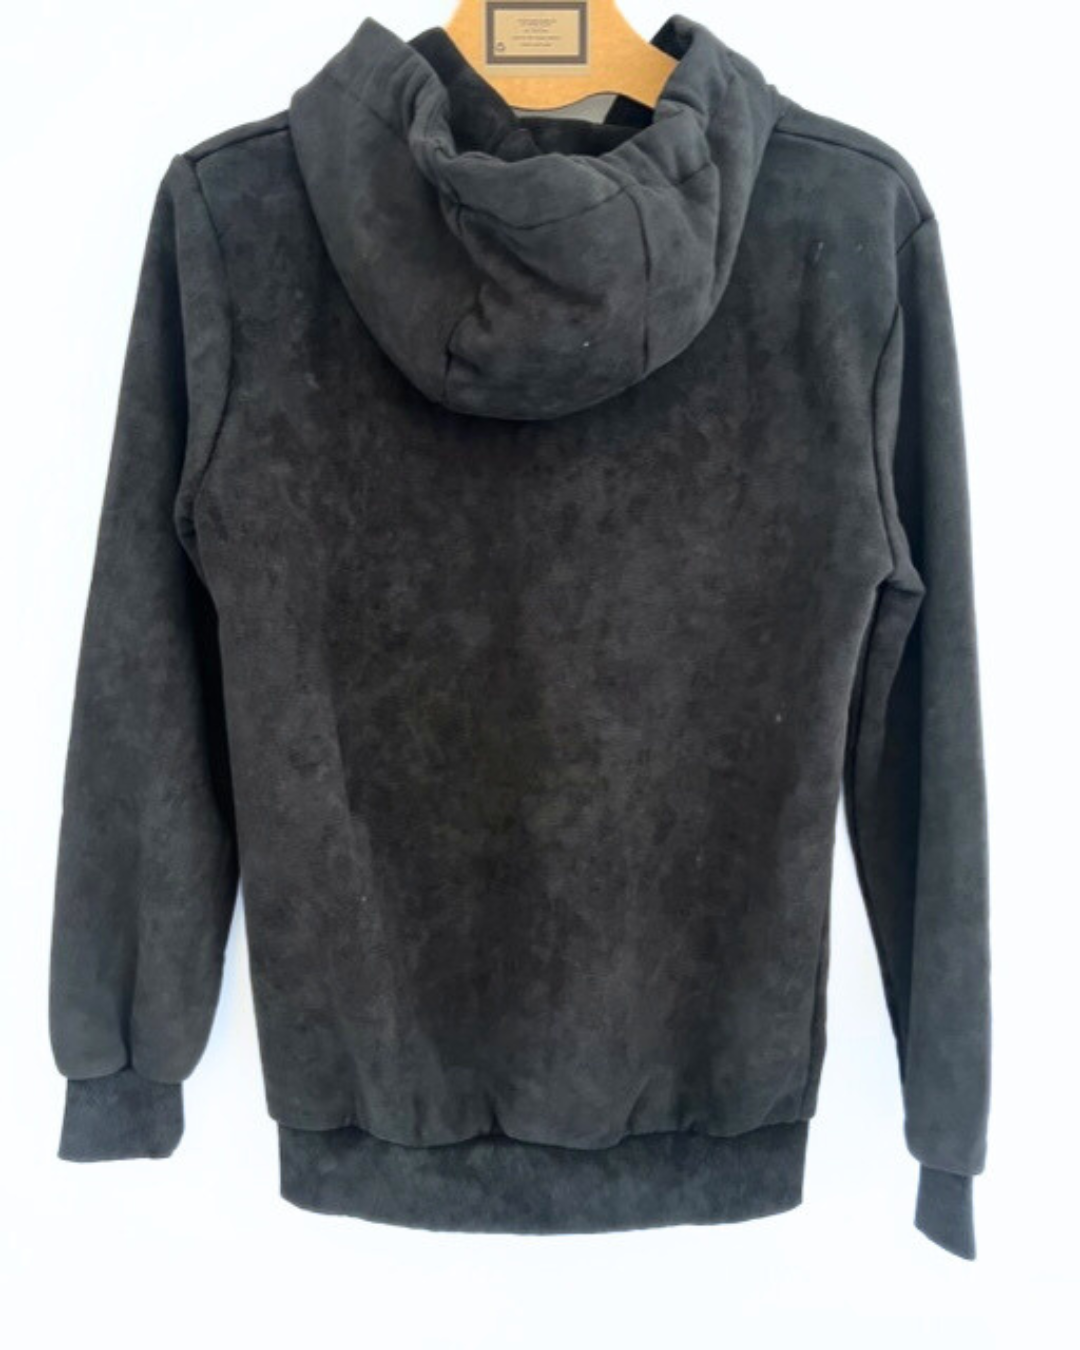 Acid washed Black Hoodie with Hand Stitched eyelet and Pom Pom detail